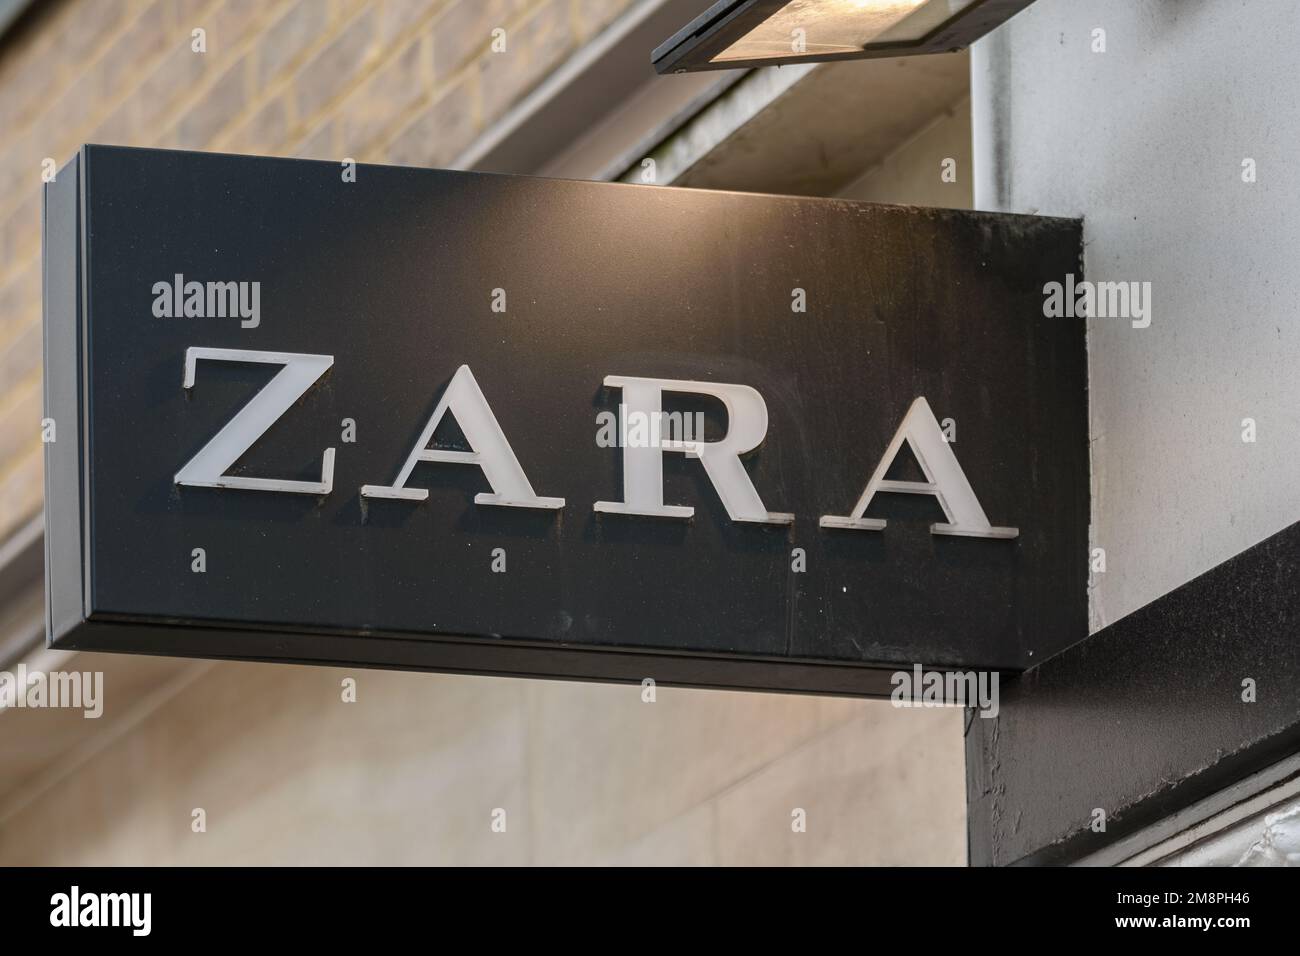 Zara fashion store brand outside one of their clothing shops in London, UK  Stock Photo - Alamy